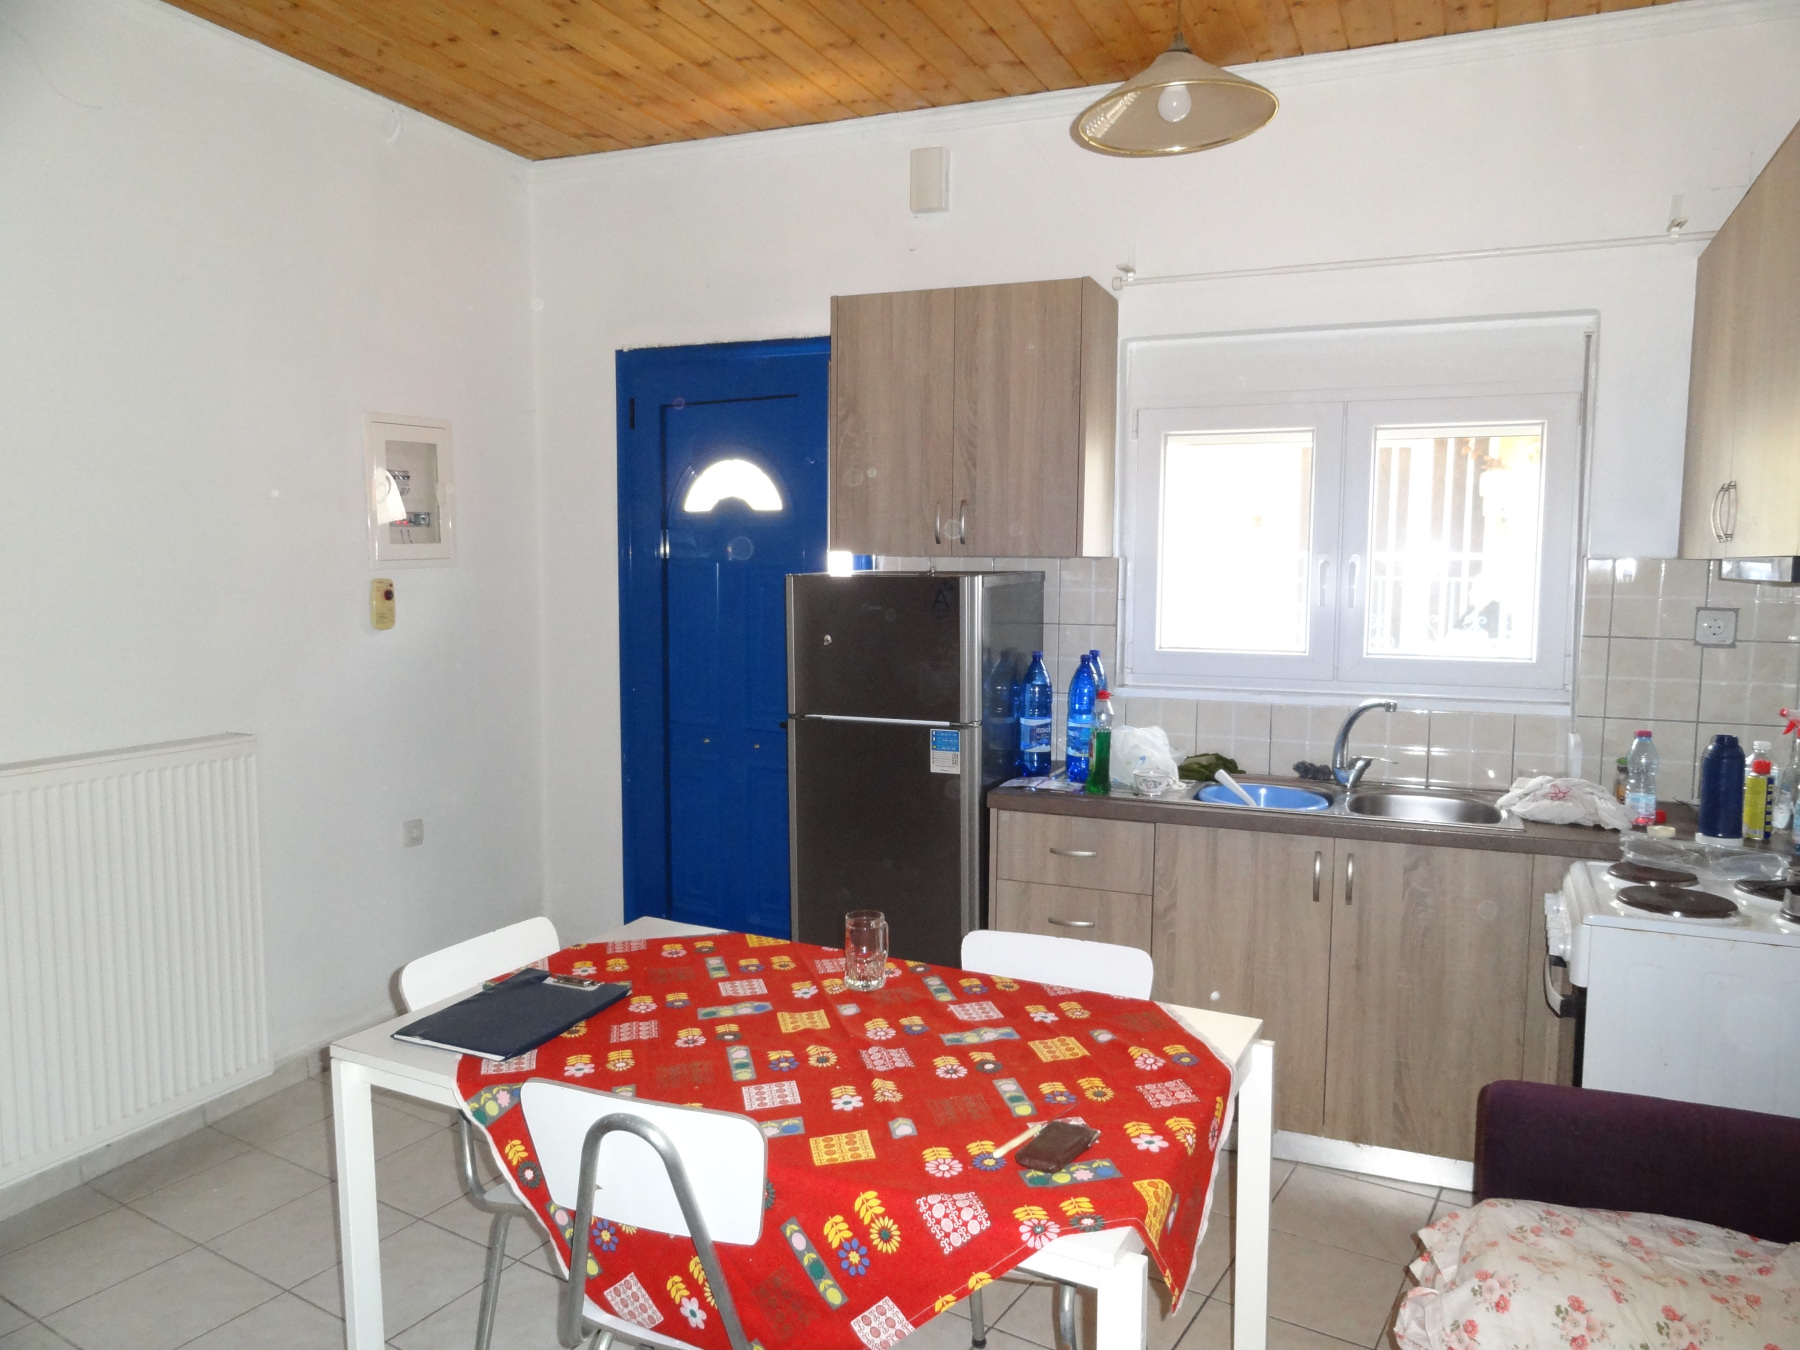 Furnished ground floor 1 bedroom apartment for rent, 58 sq.m. the center of Ioannina